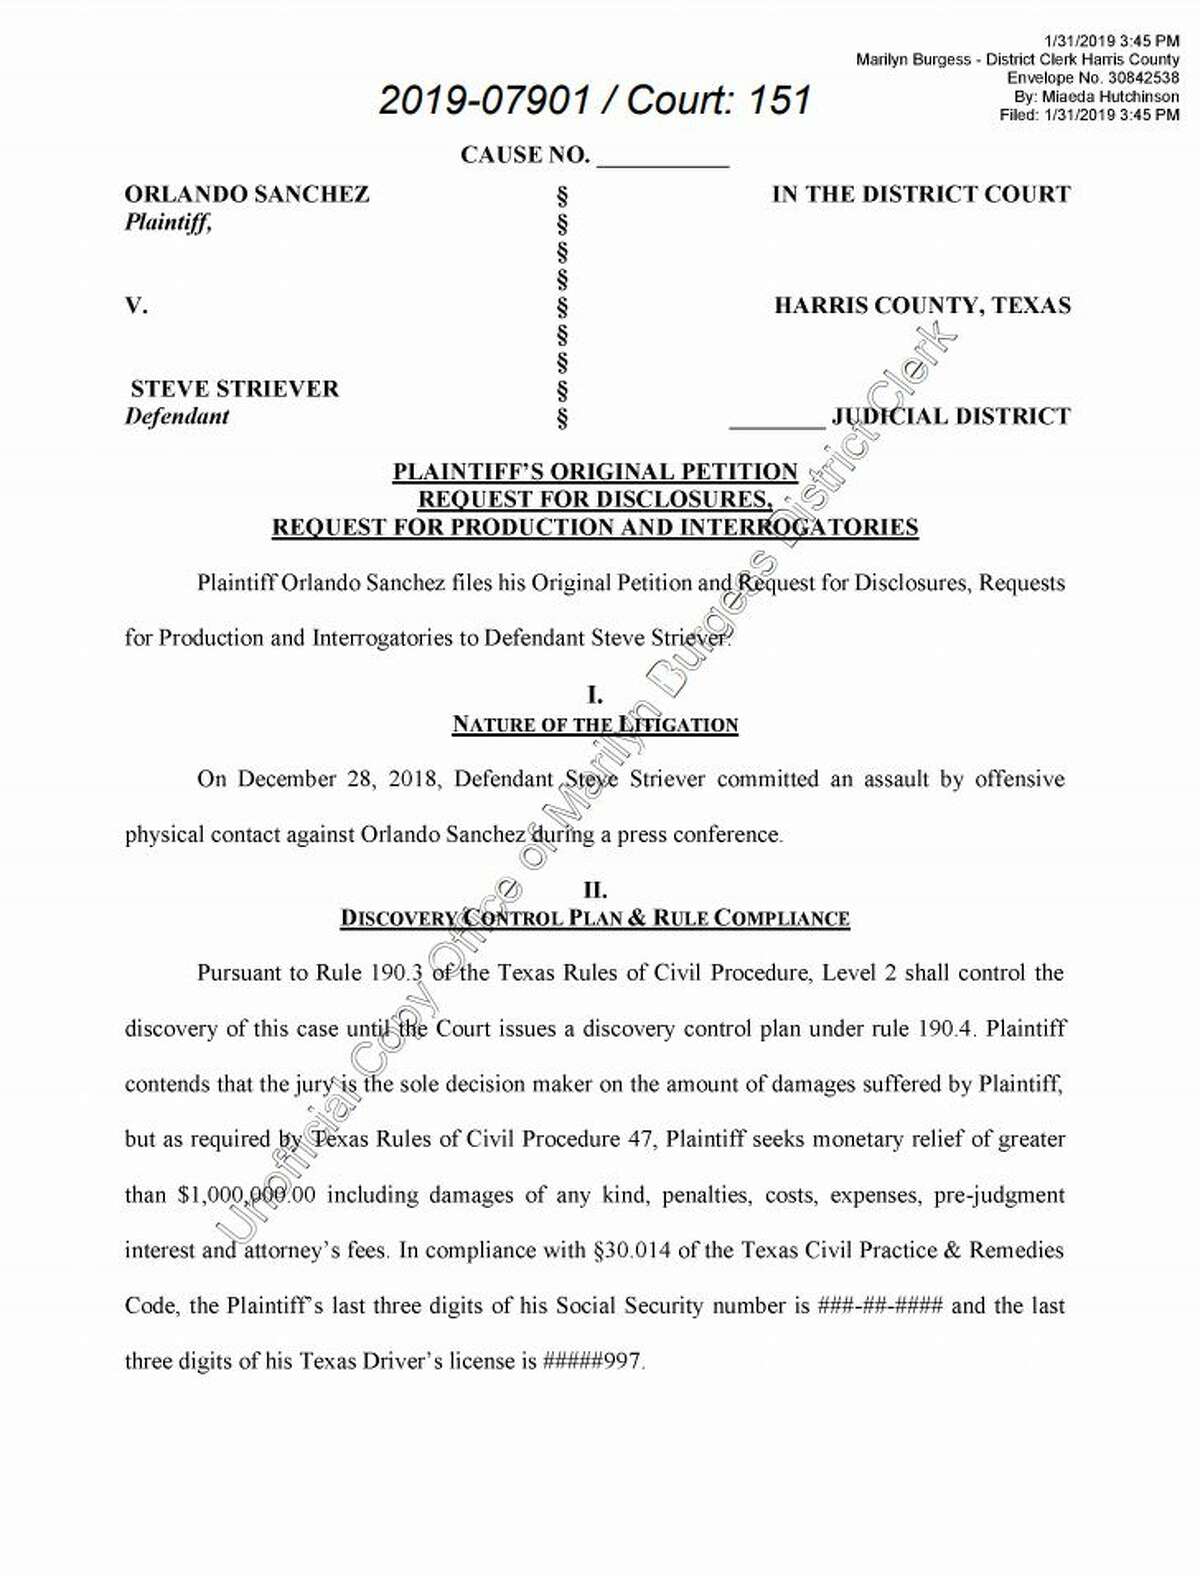 Former Harris County treasurer Orlando Sanchez filed a lawsuit against a man who allegedly poured water on him during a press conference in December.